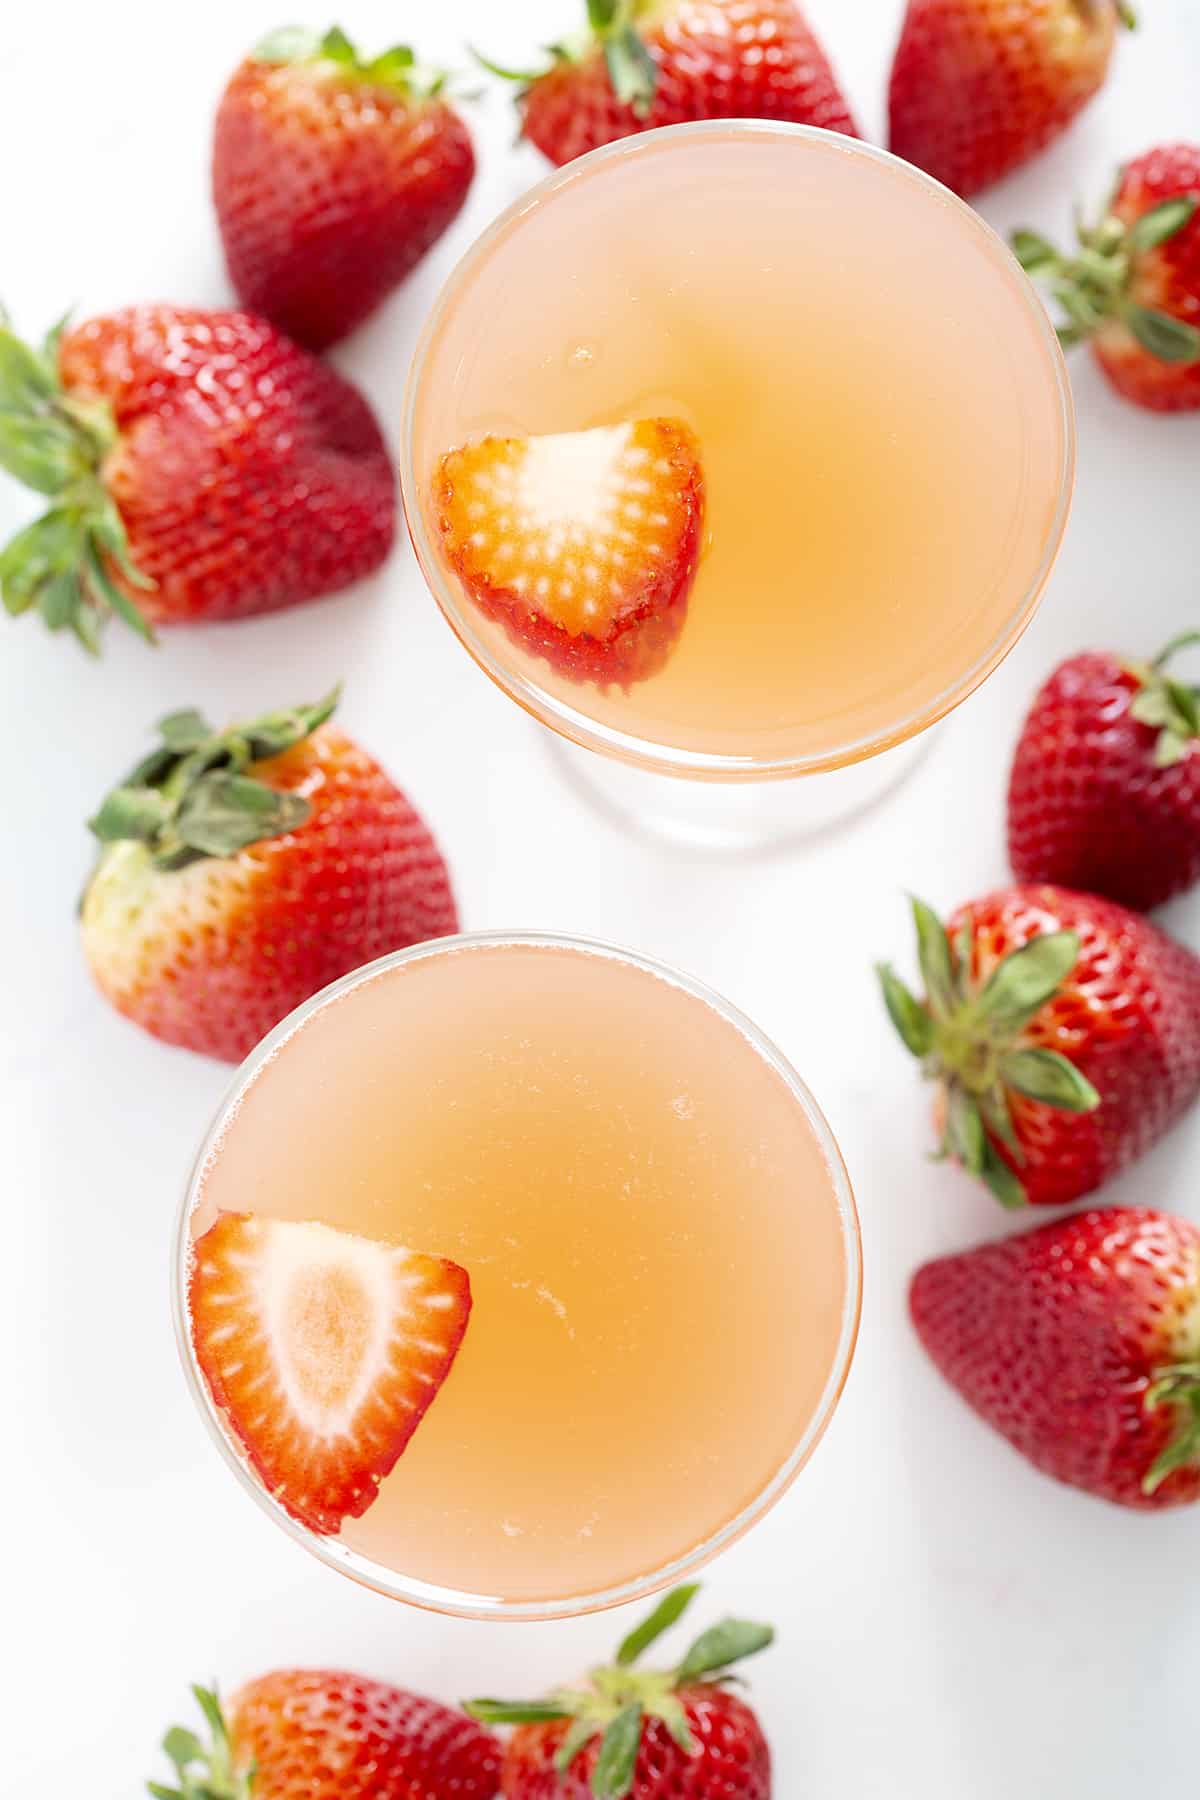 champagne coupe glasses filled with strawberry rhubarb french 75 from above